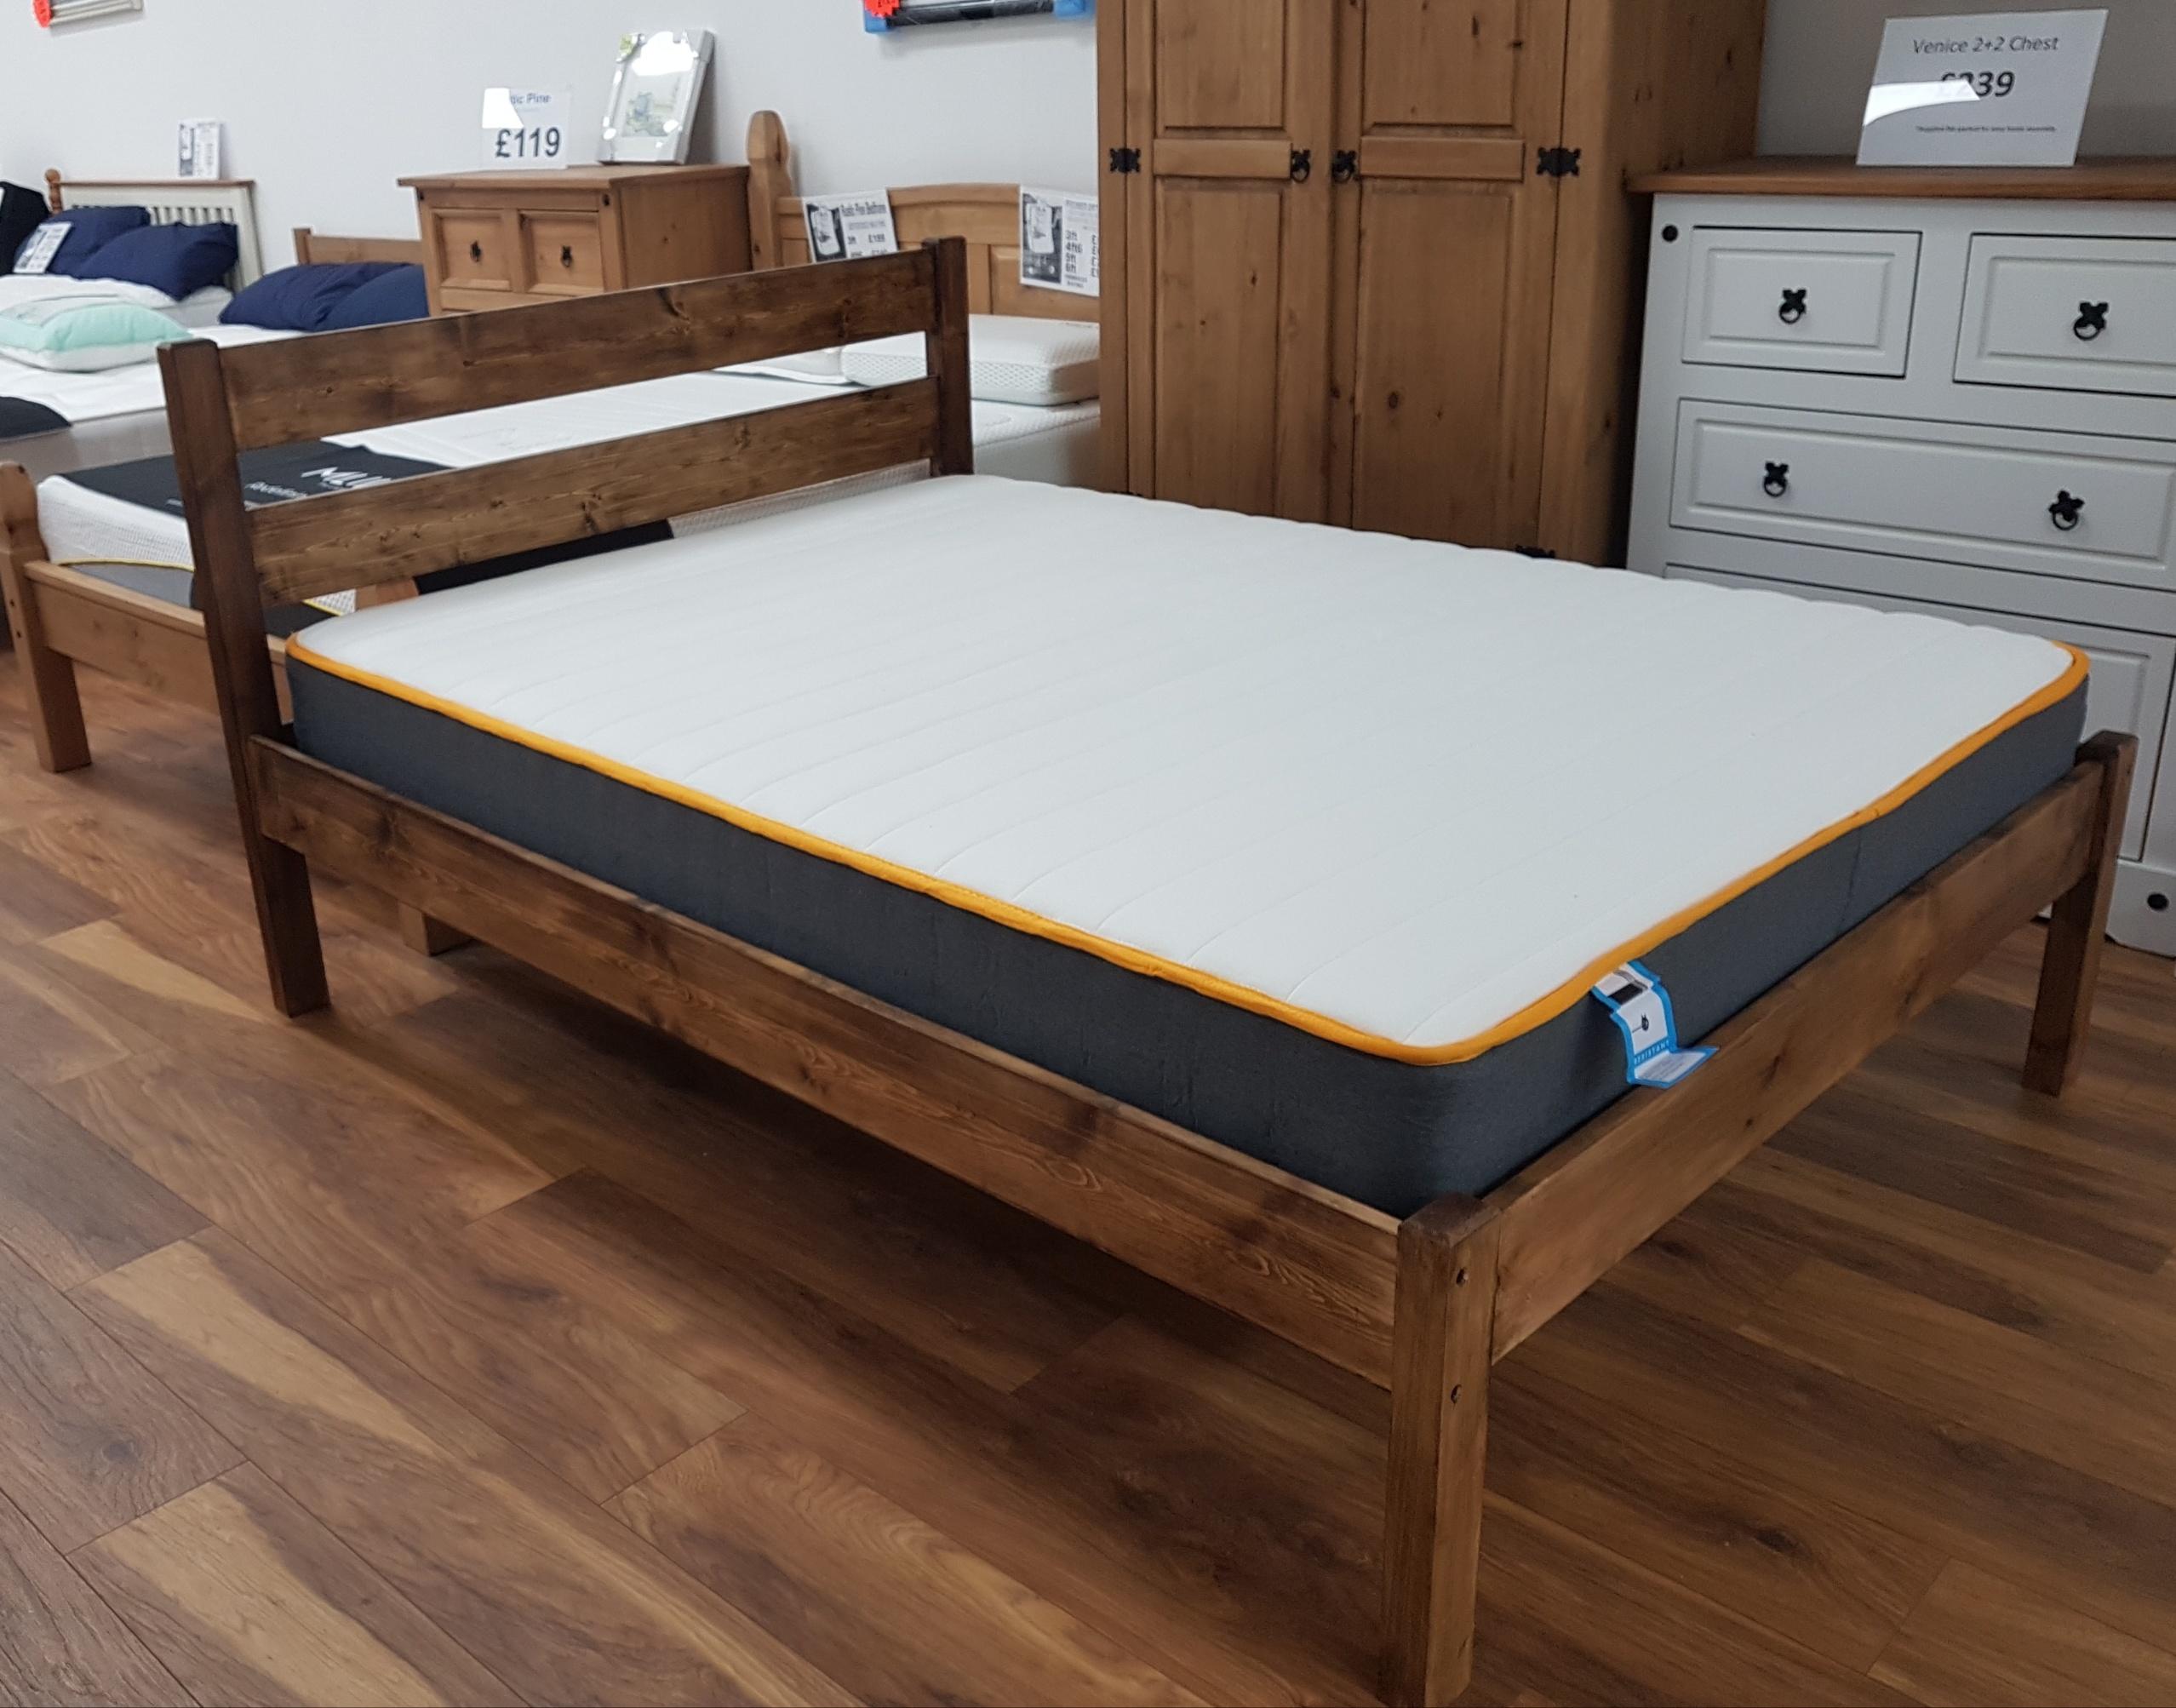 Lisa bed frame shown in the Mattress people shop